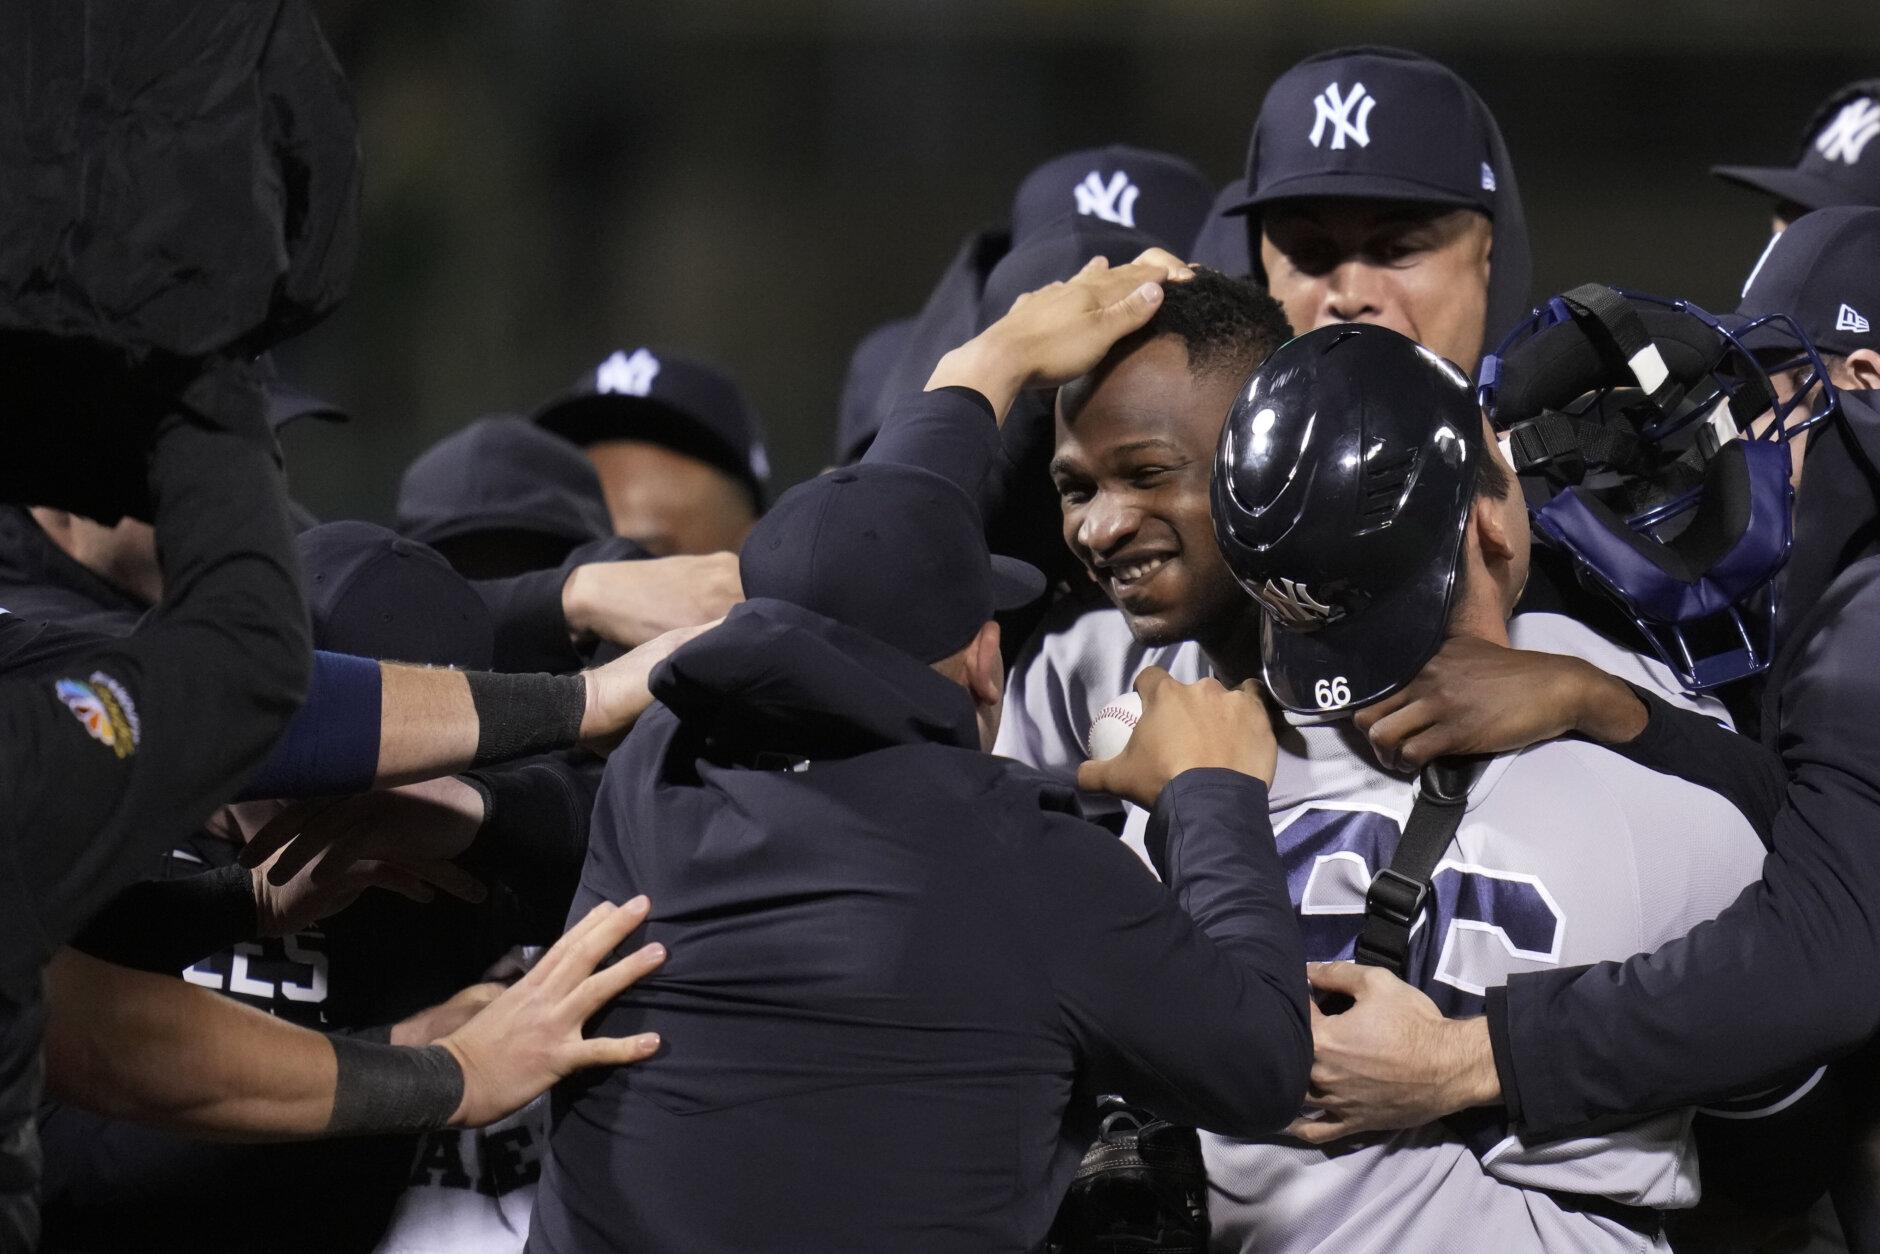 Yankees pitcher Domingo Germán throws perfect game against Oakland, the  24th in MLB history